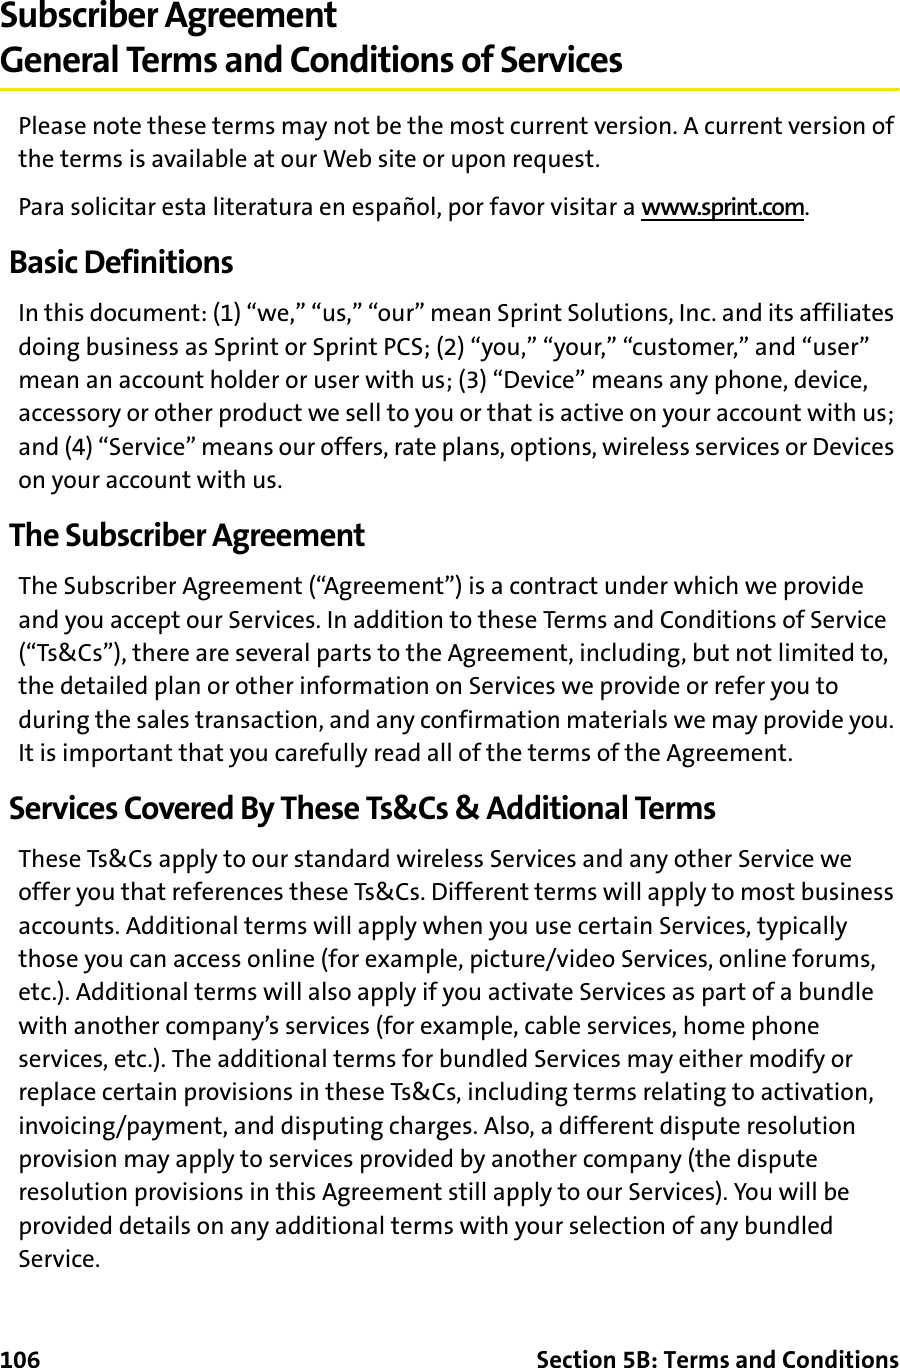 106 Section 5B: Terms and ConditionsSubscriber AgreementGeneral Terms and Conditions of ServicesPlease note these terms may not be the most current version. A current version of the terms is available at our Web site or upon request.Para solicitar esta literatura en español, por favor visitar a www.sprint.com.Basic DefinitionsIn this document: (1) “we,” “us,” “our” mean Sprint Solutions, Inc. and its affiliates doing business as Sprint or Sprint PCS; (2) “you,” “your,” “customer,” and “user” mean an account holder or user with us; (3) “Device” means any phone, device, accessory or other product we sell to you or that is active on your account with us; and (4) “Service” means our offers, rate plans, options, wireless services or Devices on your account with us.The Subscriber AgreementThe Subscriber Agreement (“Agreement”) is a contract under which we provide and you accept our Services. In addition to these Terms and Conditions of Service (“Ts&amp;Cs”), there are several parts to the Agreement, including, but not limited to, the detailed plan or other information on Services we provide or refer you to during the sales transaction, and any confirmation materials we may provide you. It is important that you carefully read all of the terms of the Agreement.Services Covered By These Ts&amp;Cs &amp; Additional TermsThese Ts&amp;Cs apply to our standard wireless Services and any other Service we offer you that references these Ts&amp;Cs. Different terms will apply to most business accounts. Additional terms will apply when you use certain Services, typically those you can access online (for example, picture/video Services, online forums, etc.). Additional terms will also apply if you activate Services as part of a bundle with another company’s services (for example, cable services, home phone services, etc.). The additional terms for bundled Services may either modify or replace certain provisions in these Ts&amp;Cs, including terms relating to activation, invoicing/payment, and disputing charges. Also, a different dispute resolution provision may apply to services provided by another company (the dispute resolution provisions in this Agreement still apply to our Services). You will be provided details on any additional terms with your selection of any bundled Service.